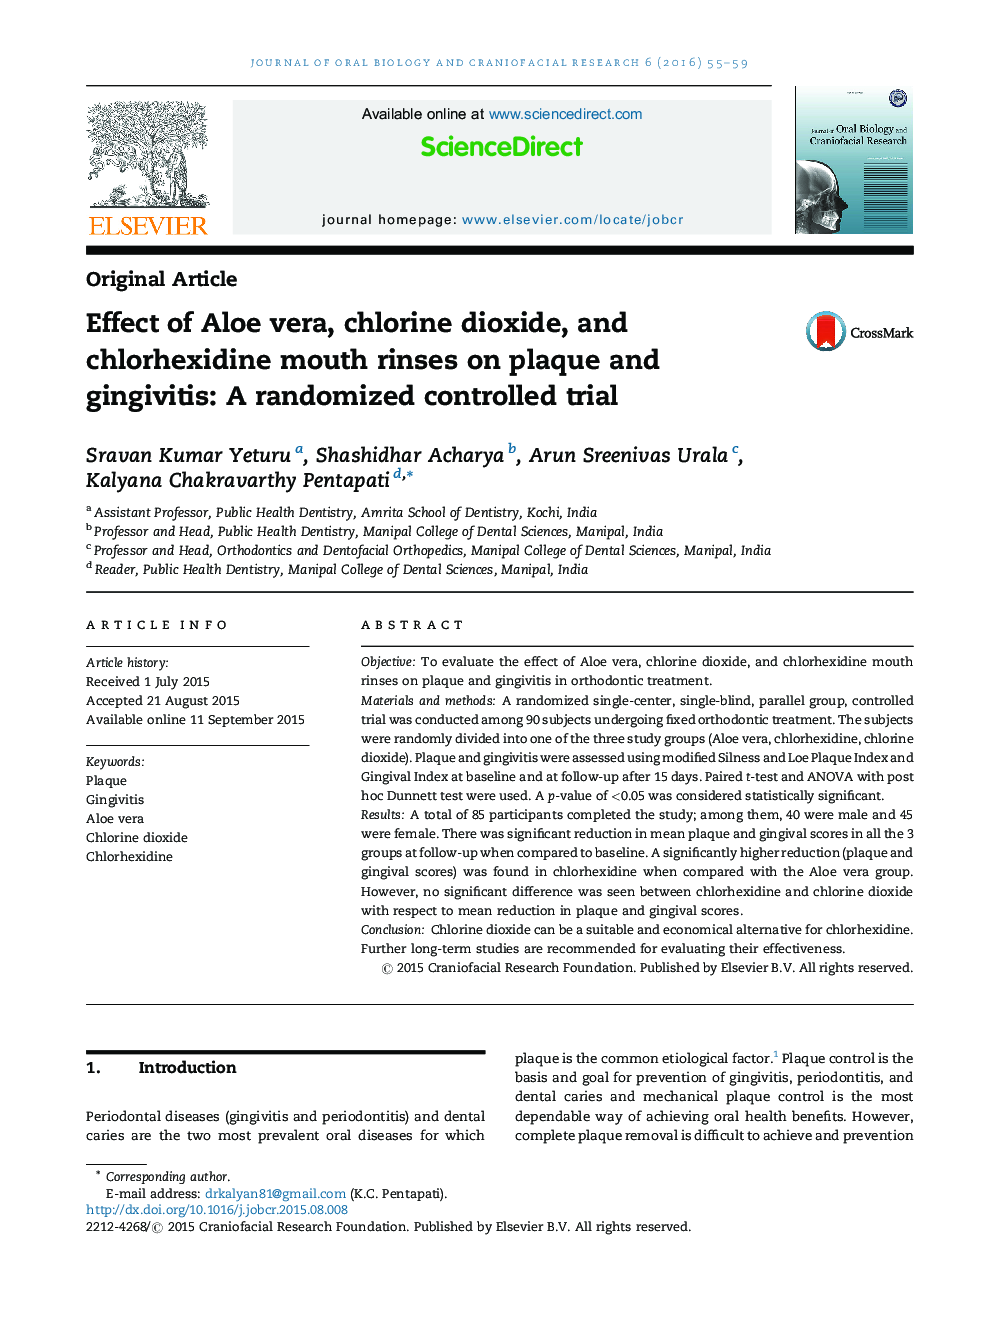 Effect of Aloe vera, chlorine dioxide, and chlorhexidine mouth rinses on plaque and gingivitis: A randomized controlled trial